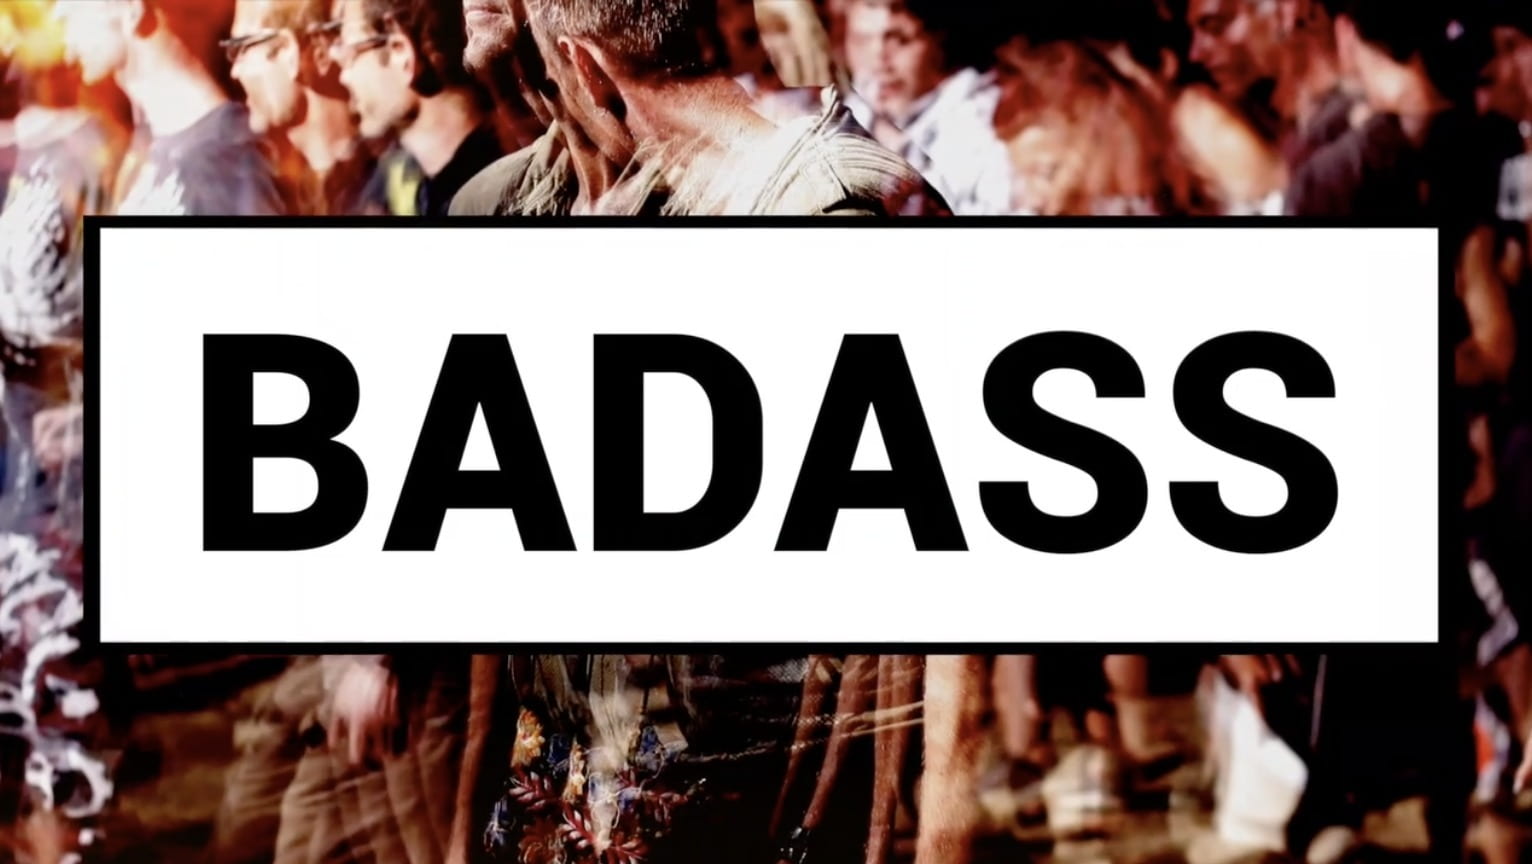 Top 5 - The Most Badass Characters from Series